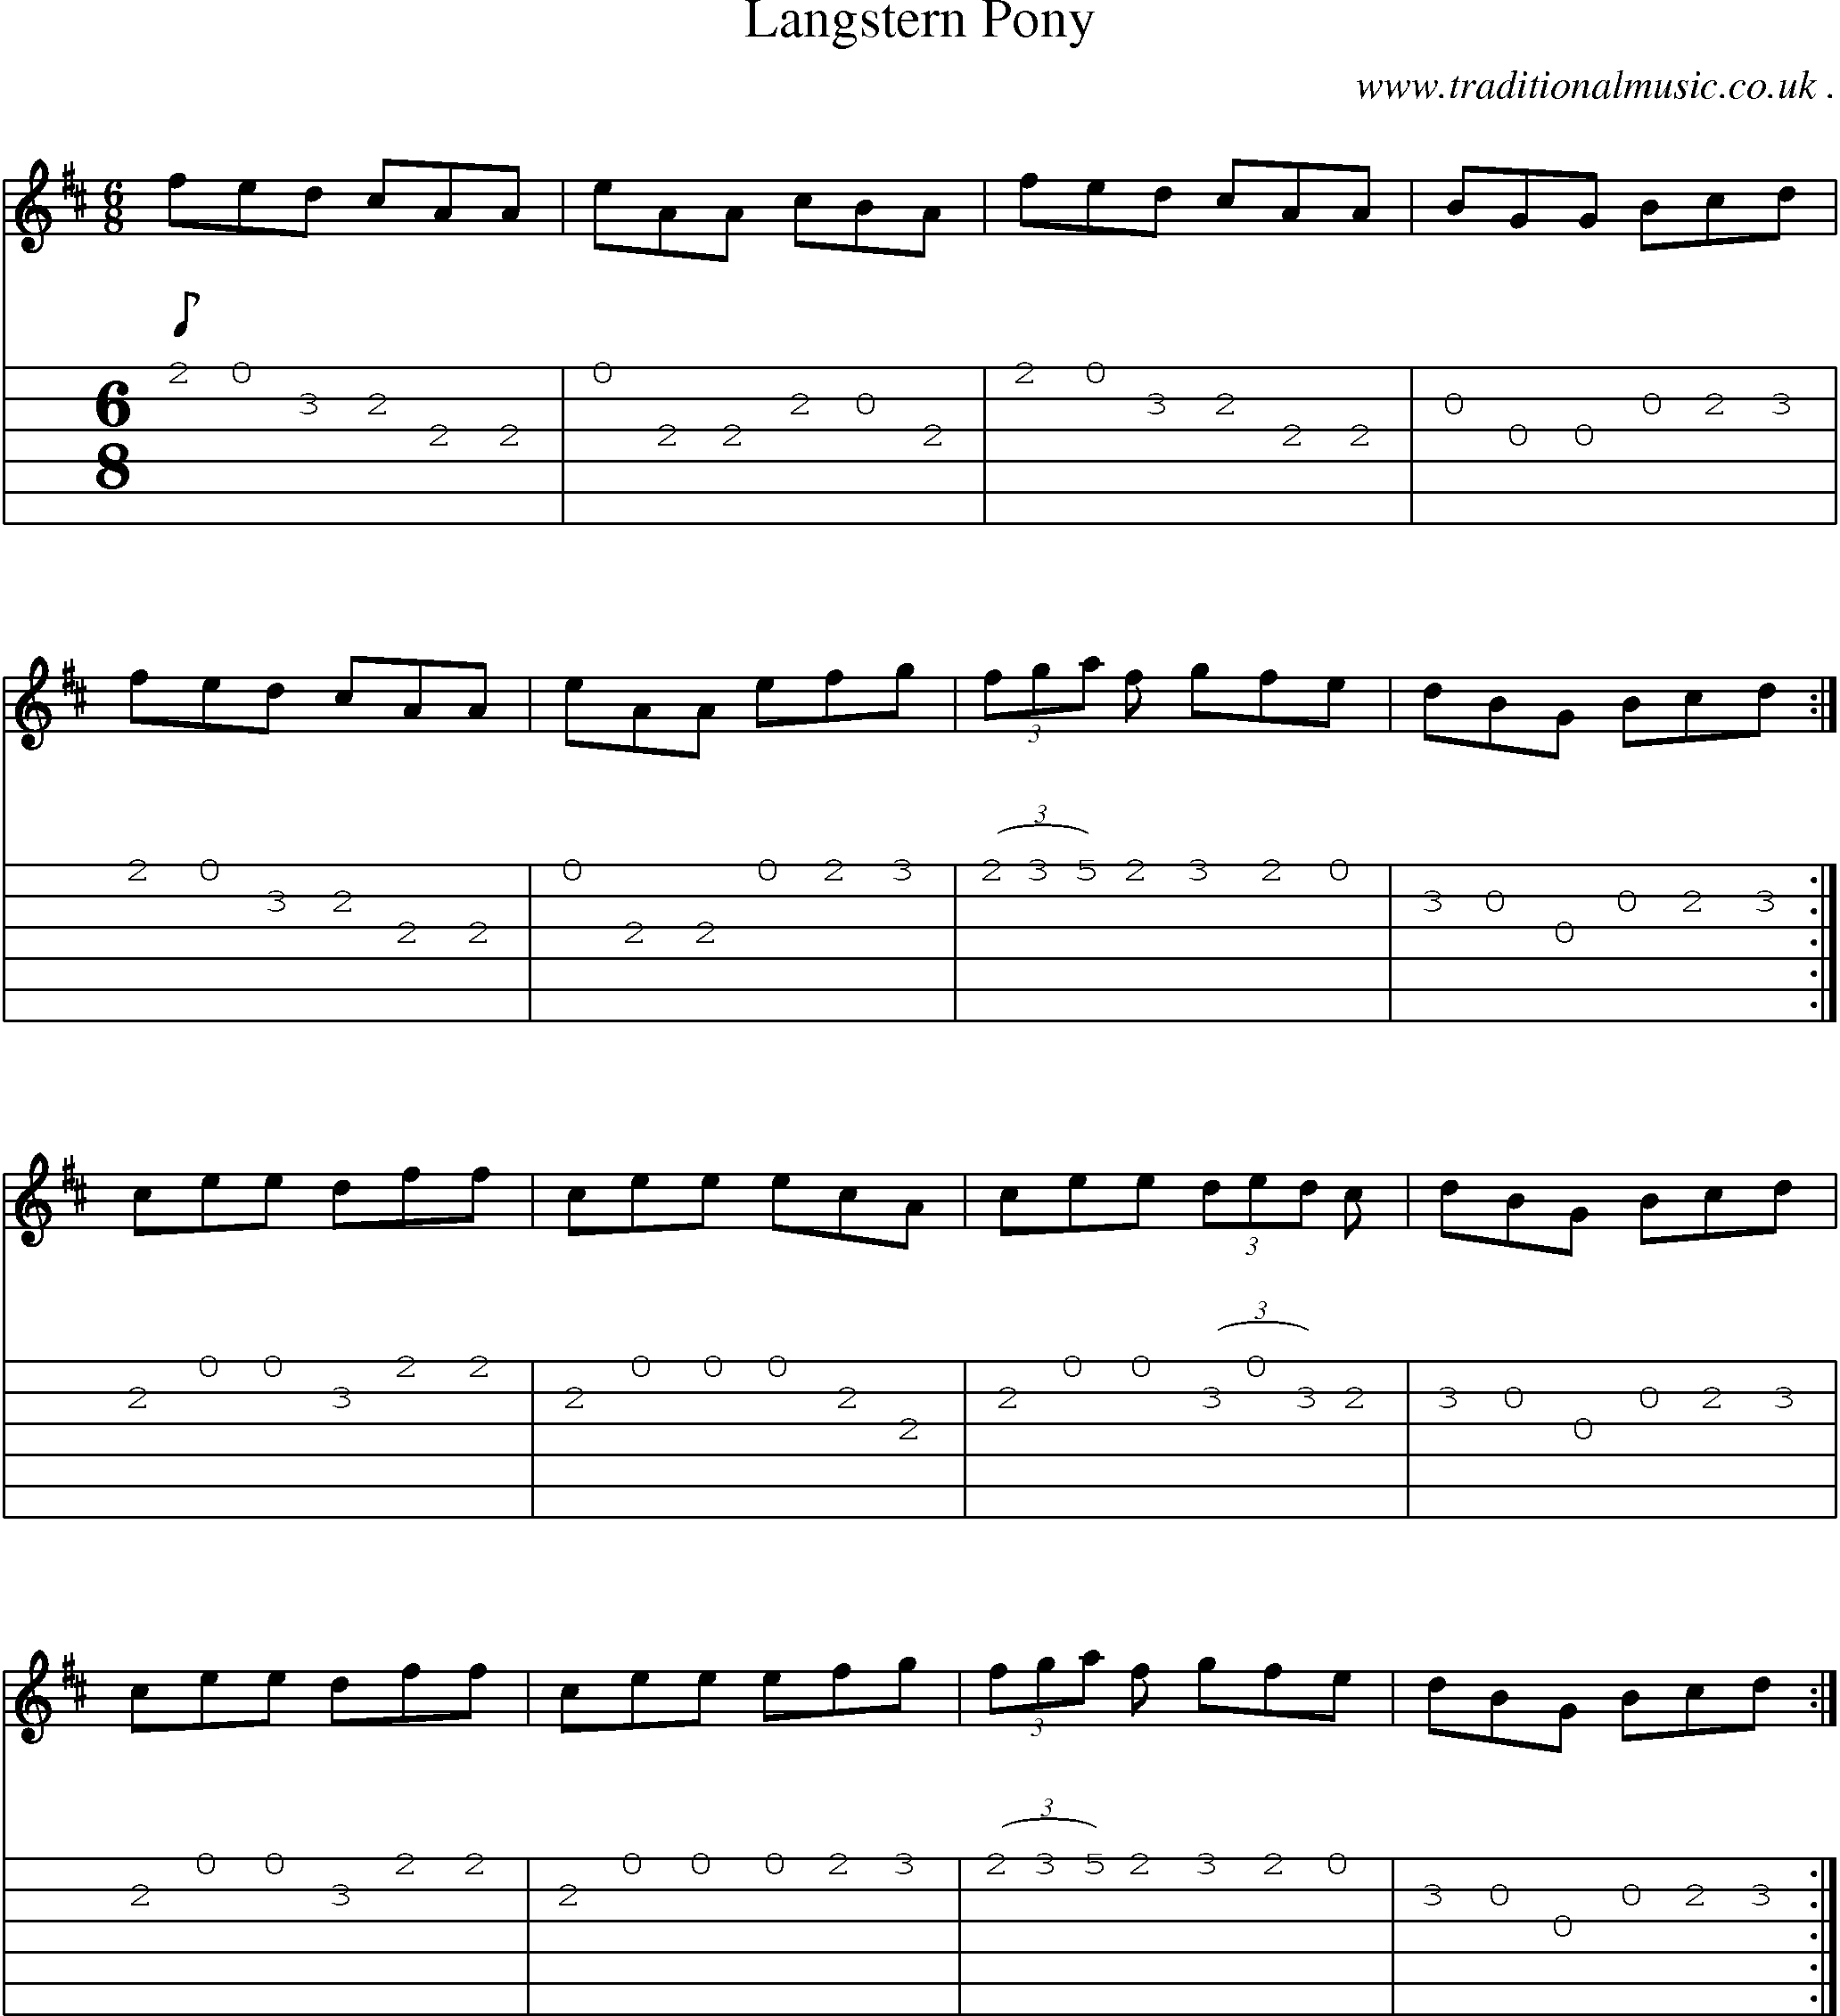 Sheet-Music and Guitar Tabs for Langstern Pony